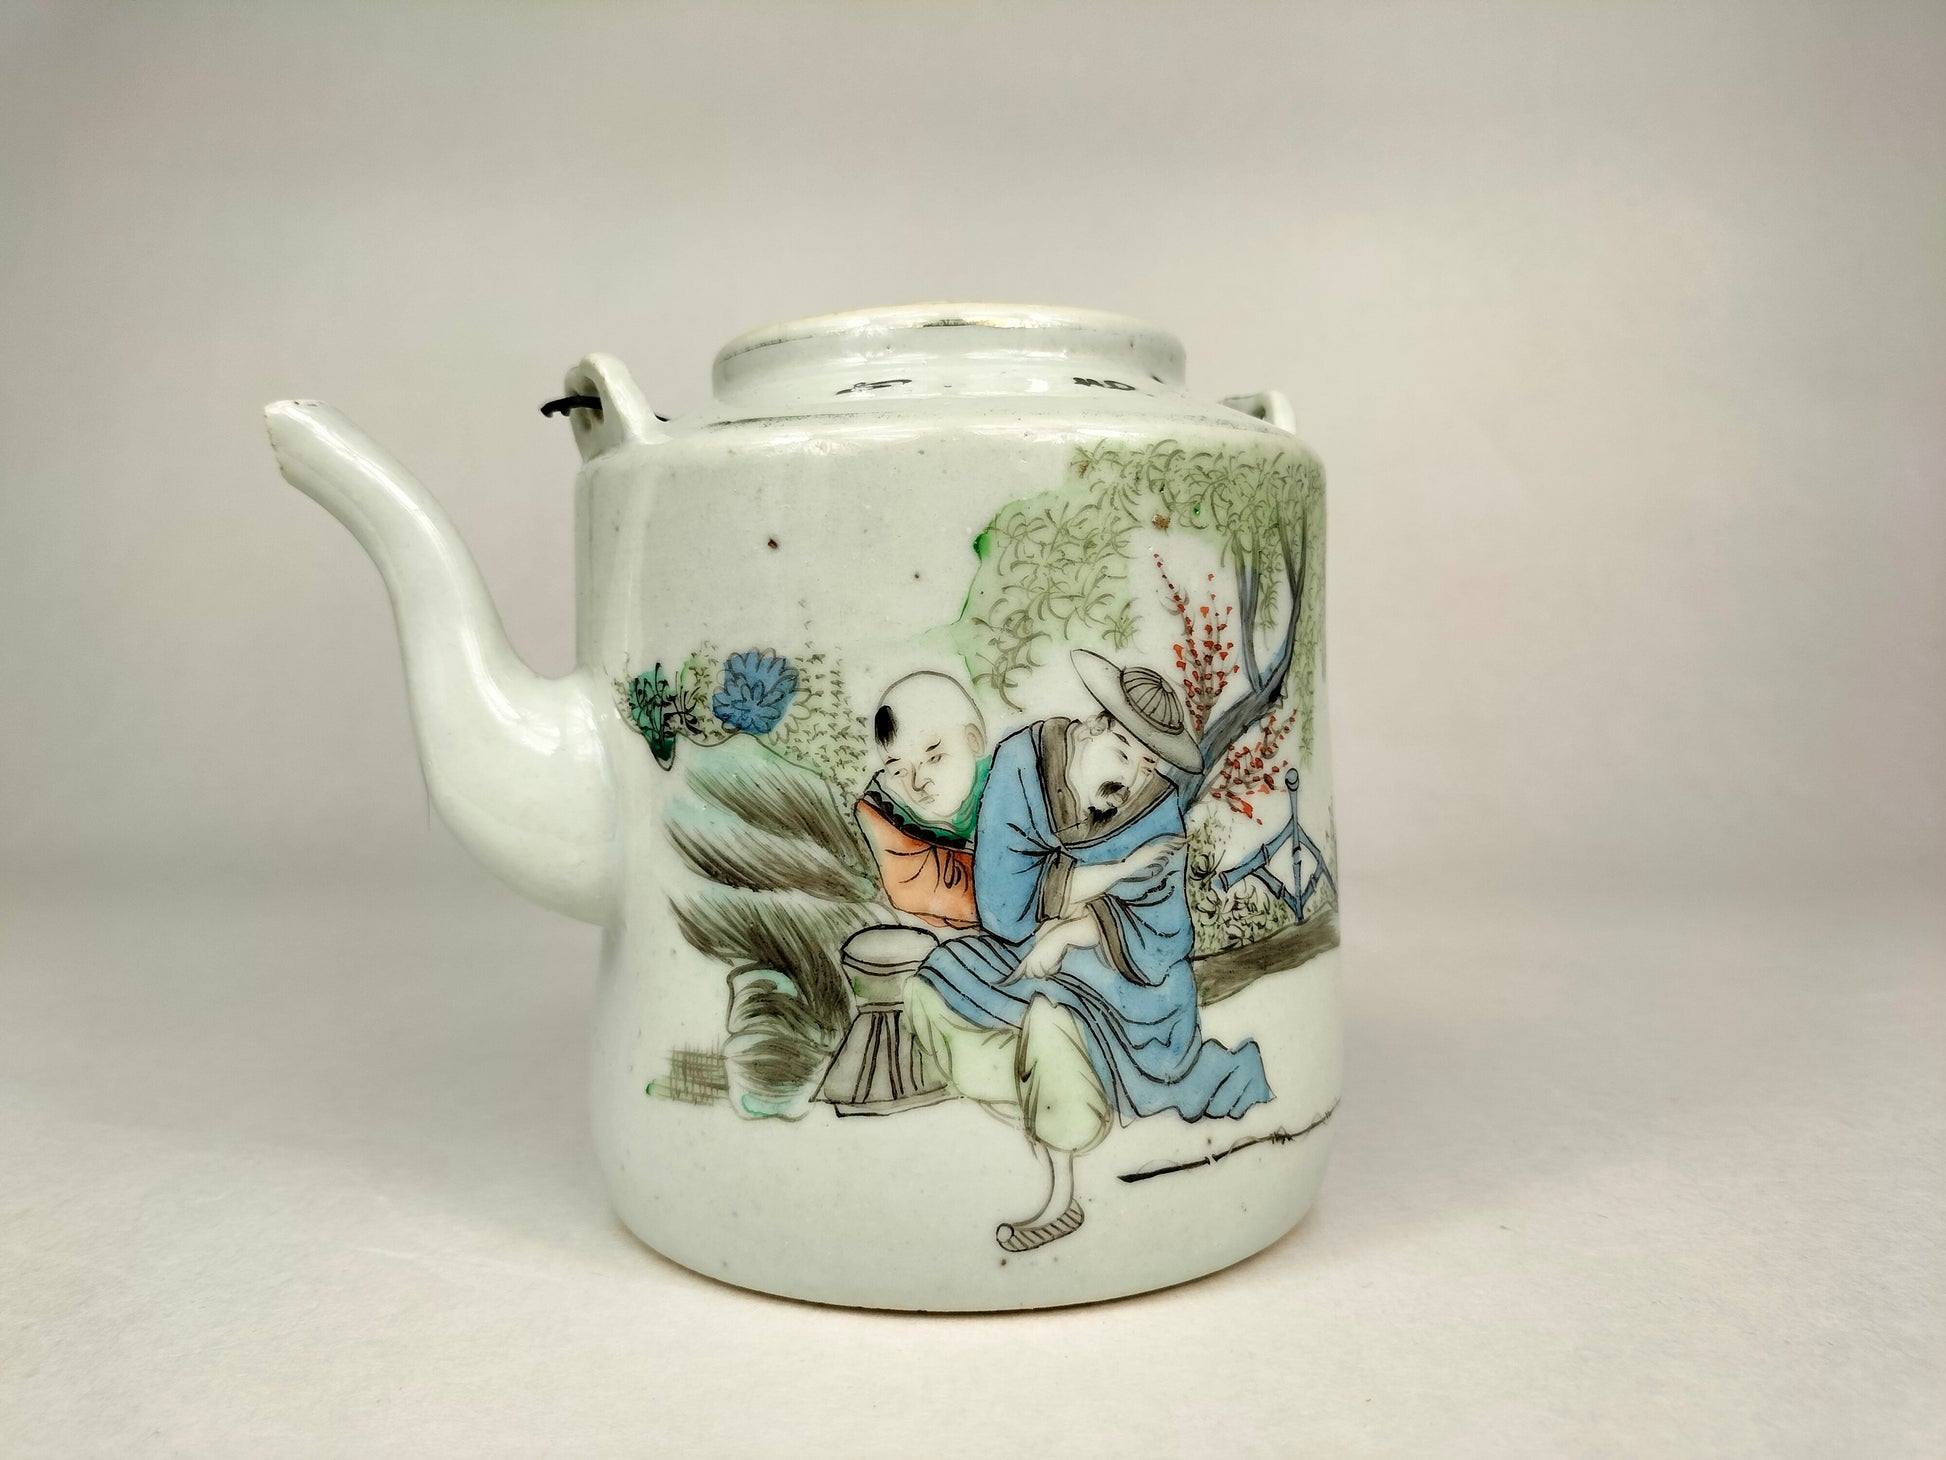 Antique Chinese ROC porcelain poem teapot decorated with figures